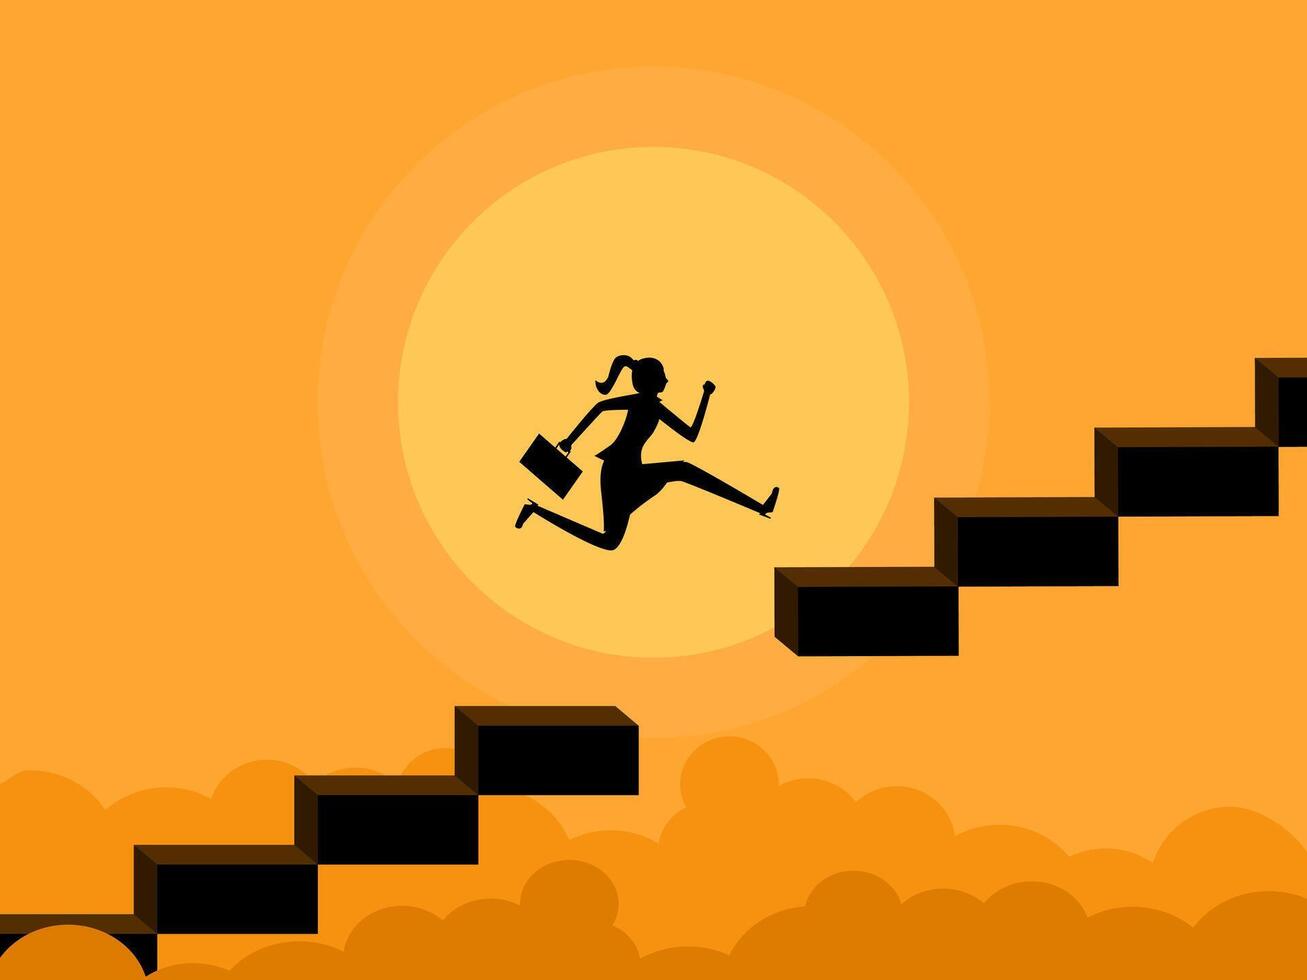 Growing in leaps and bounds. Businesswoman jumping over gaps on stairs vector